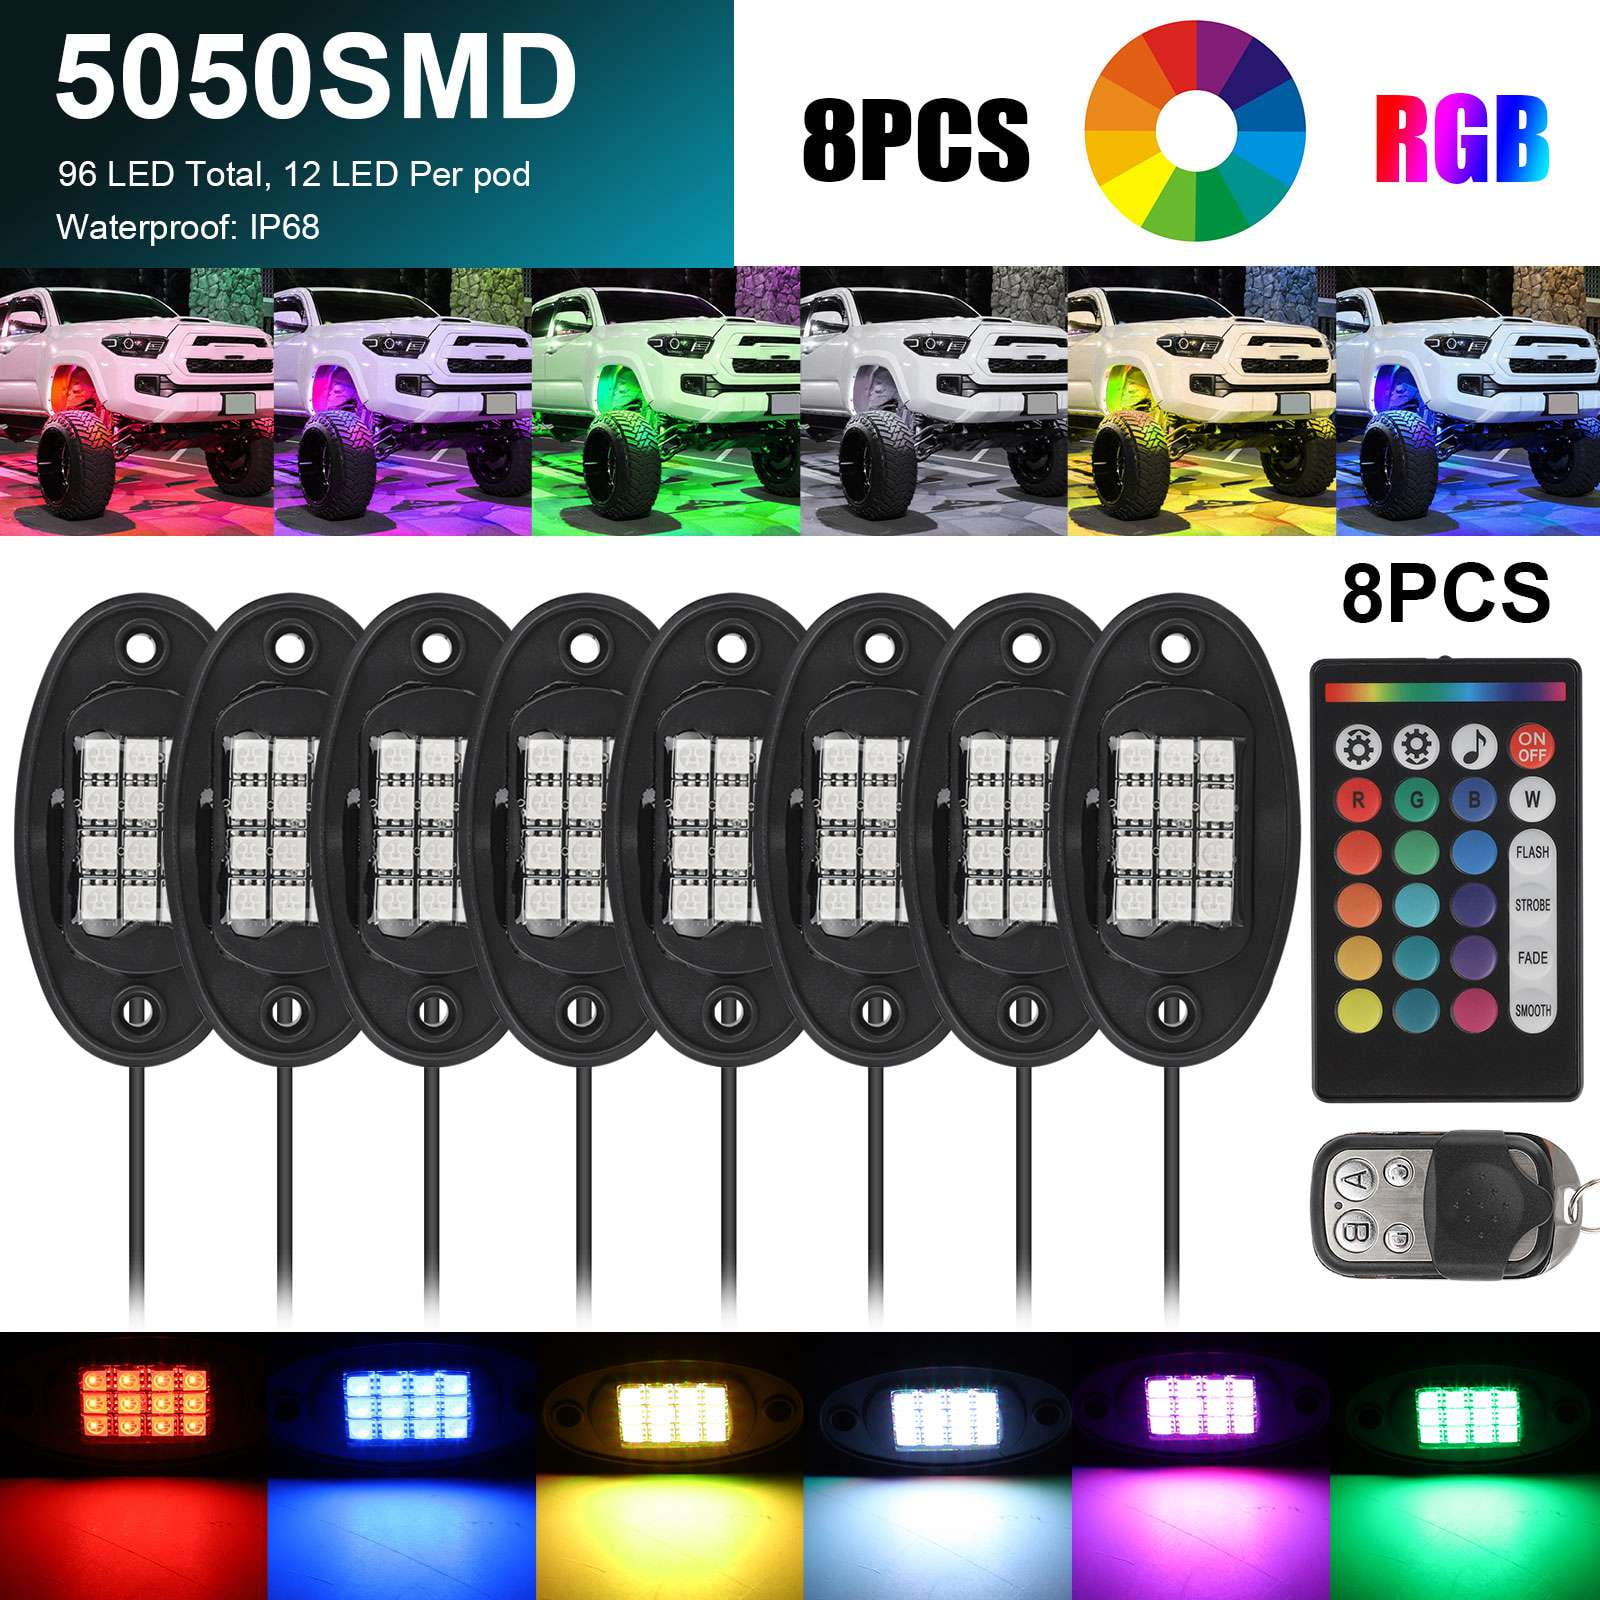 6 Pod RGB Led Rock Lights Kits with Bluetooth Control Waterproof Neon Lights DIY Color Timing Music Mode for Offroad Car Jeep Off Road Truck SUV ATV UTV Motorcycle 6pod OPL5 